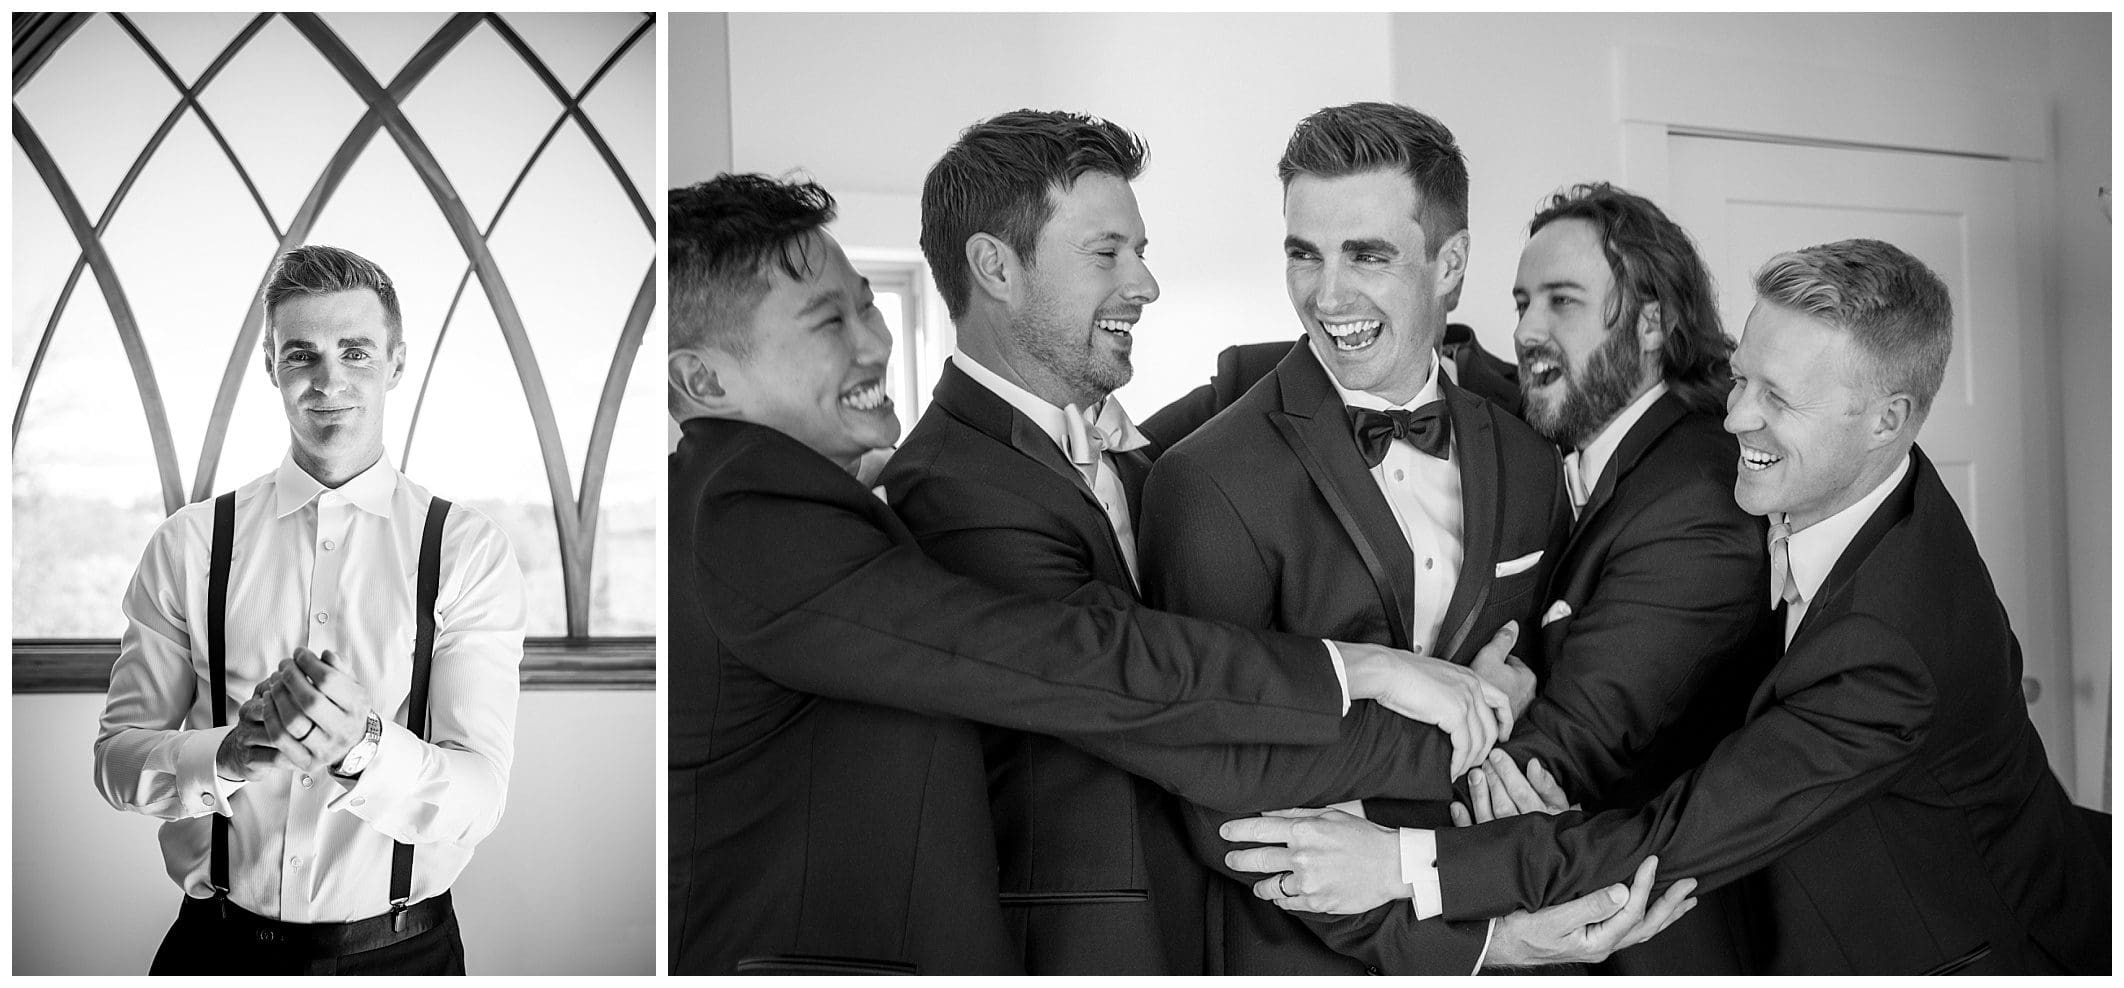 A group of groomsmen hugging each other in tuxedos at a fall wedding.